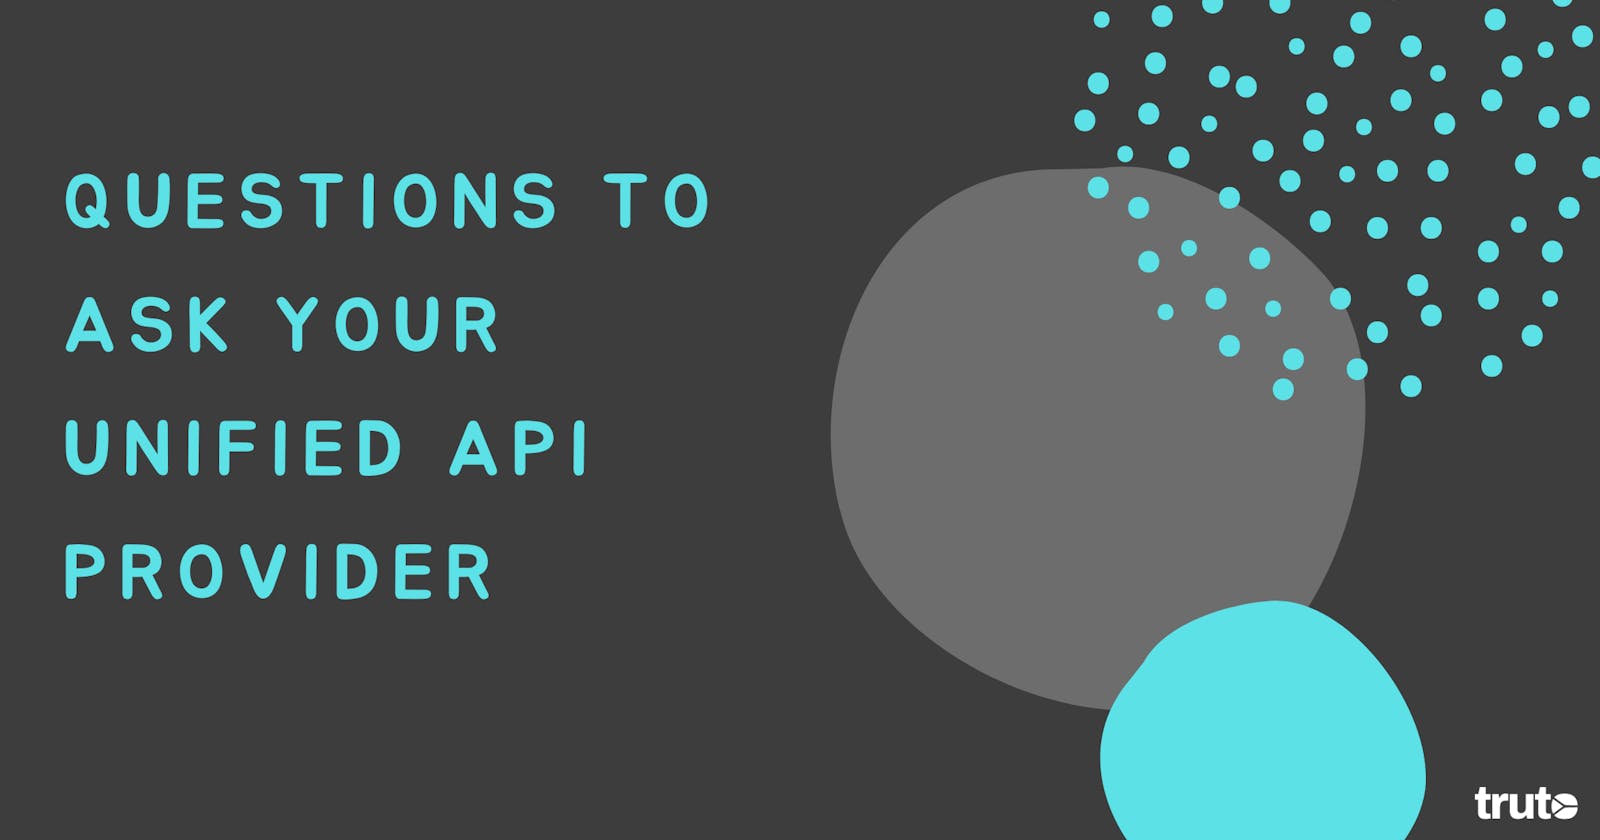 10 Questions to ask your unified API provider